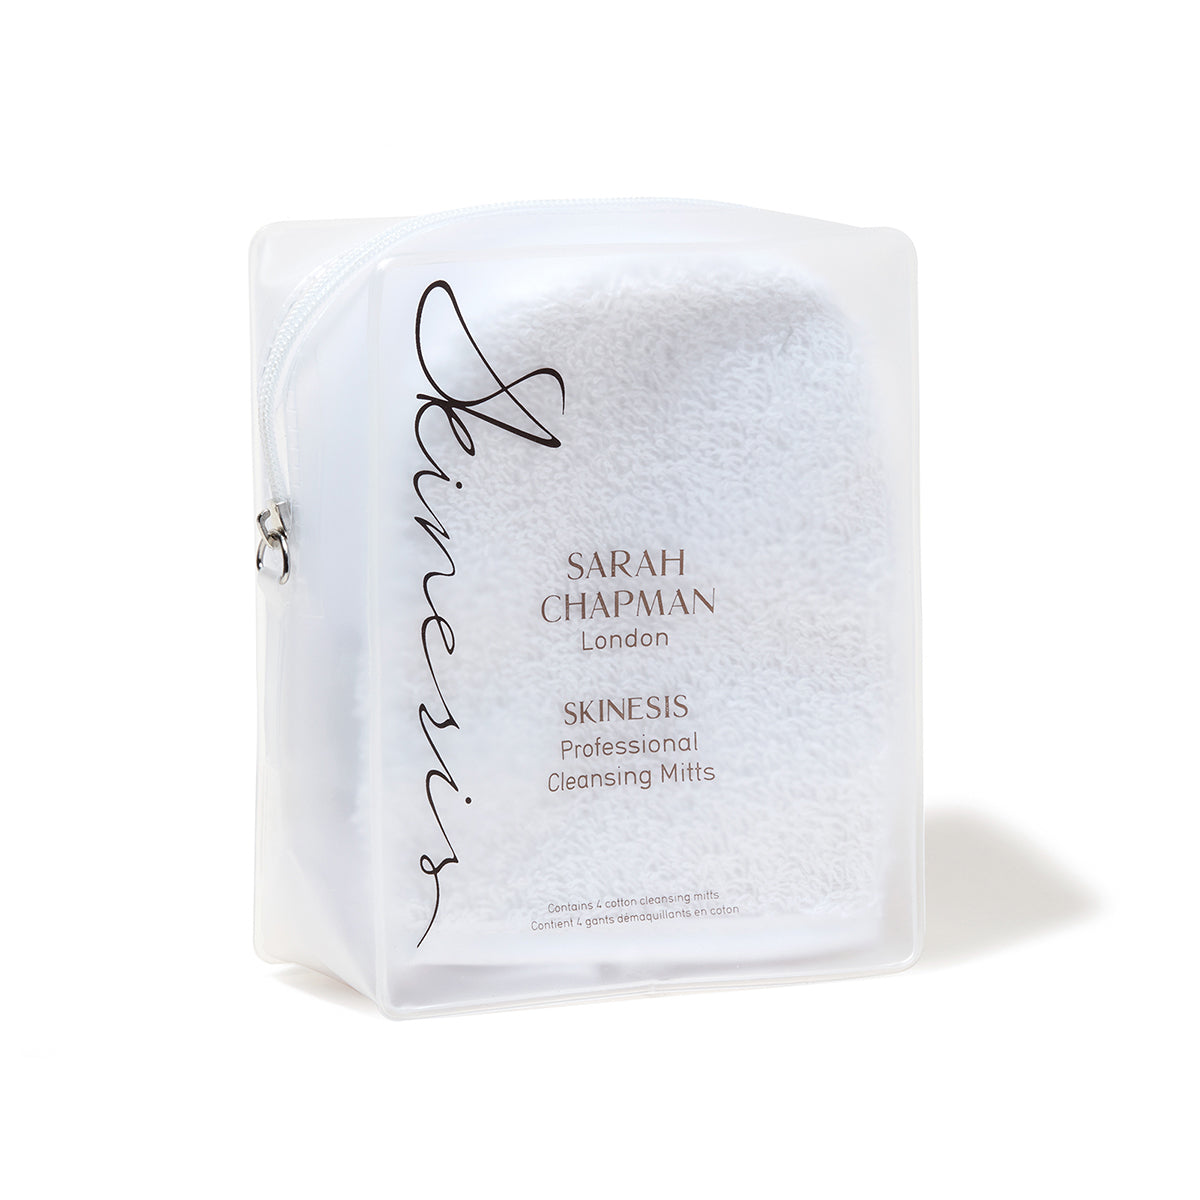 Sarah Chapman Professional Cleansing Mitts - 4mitts